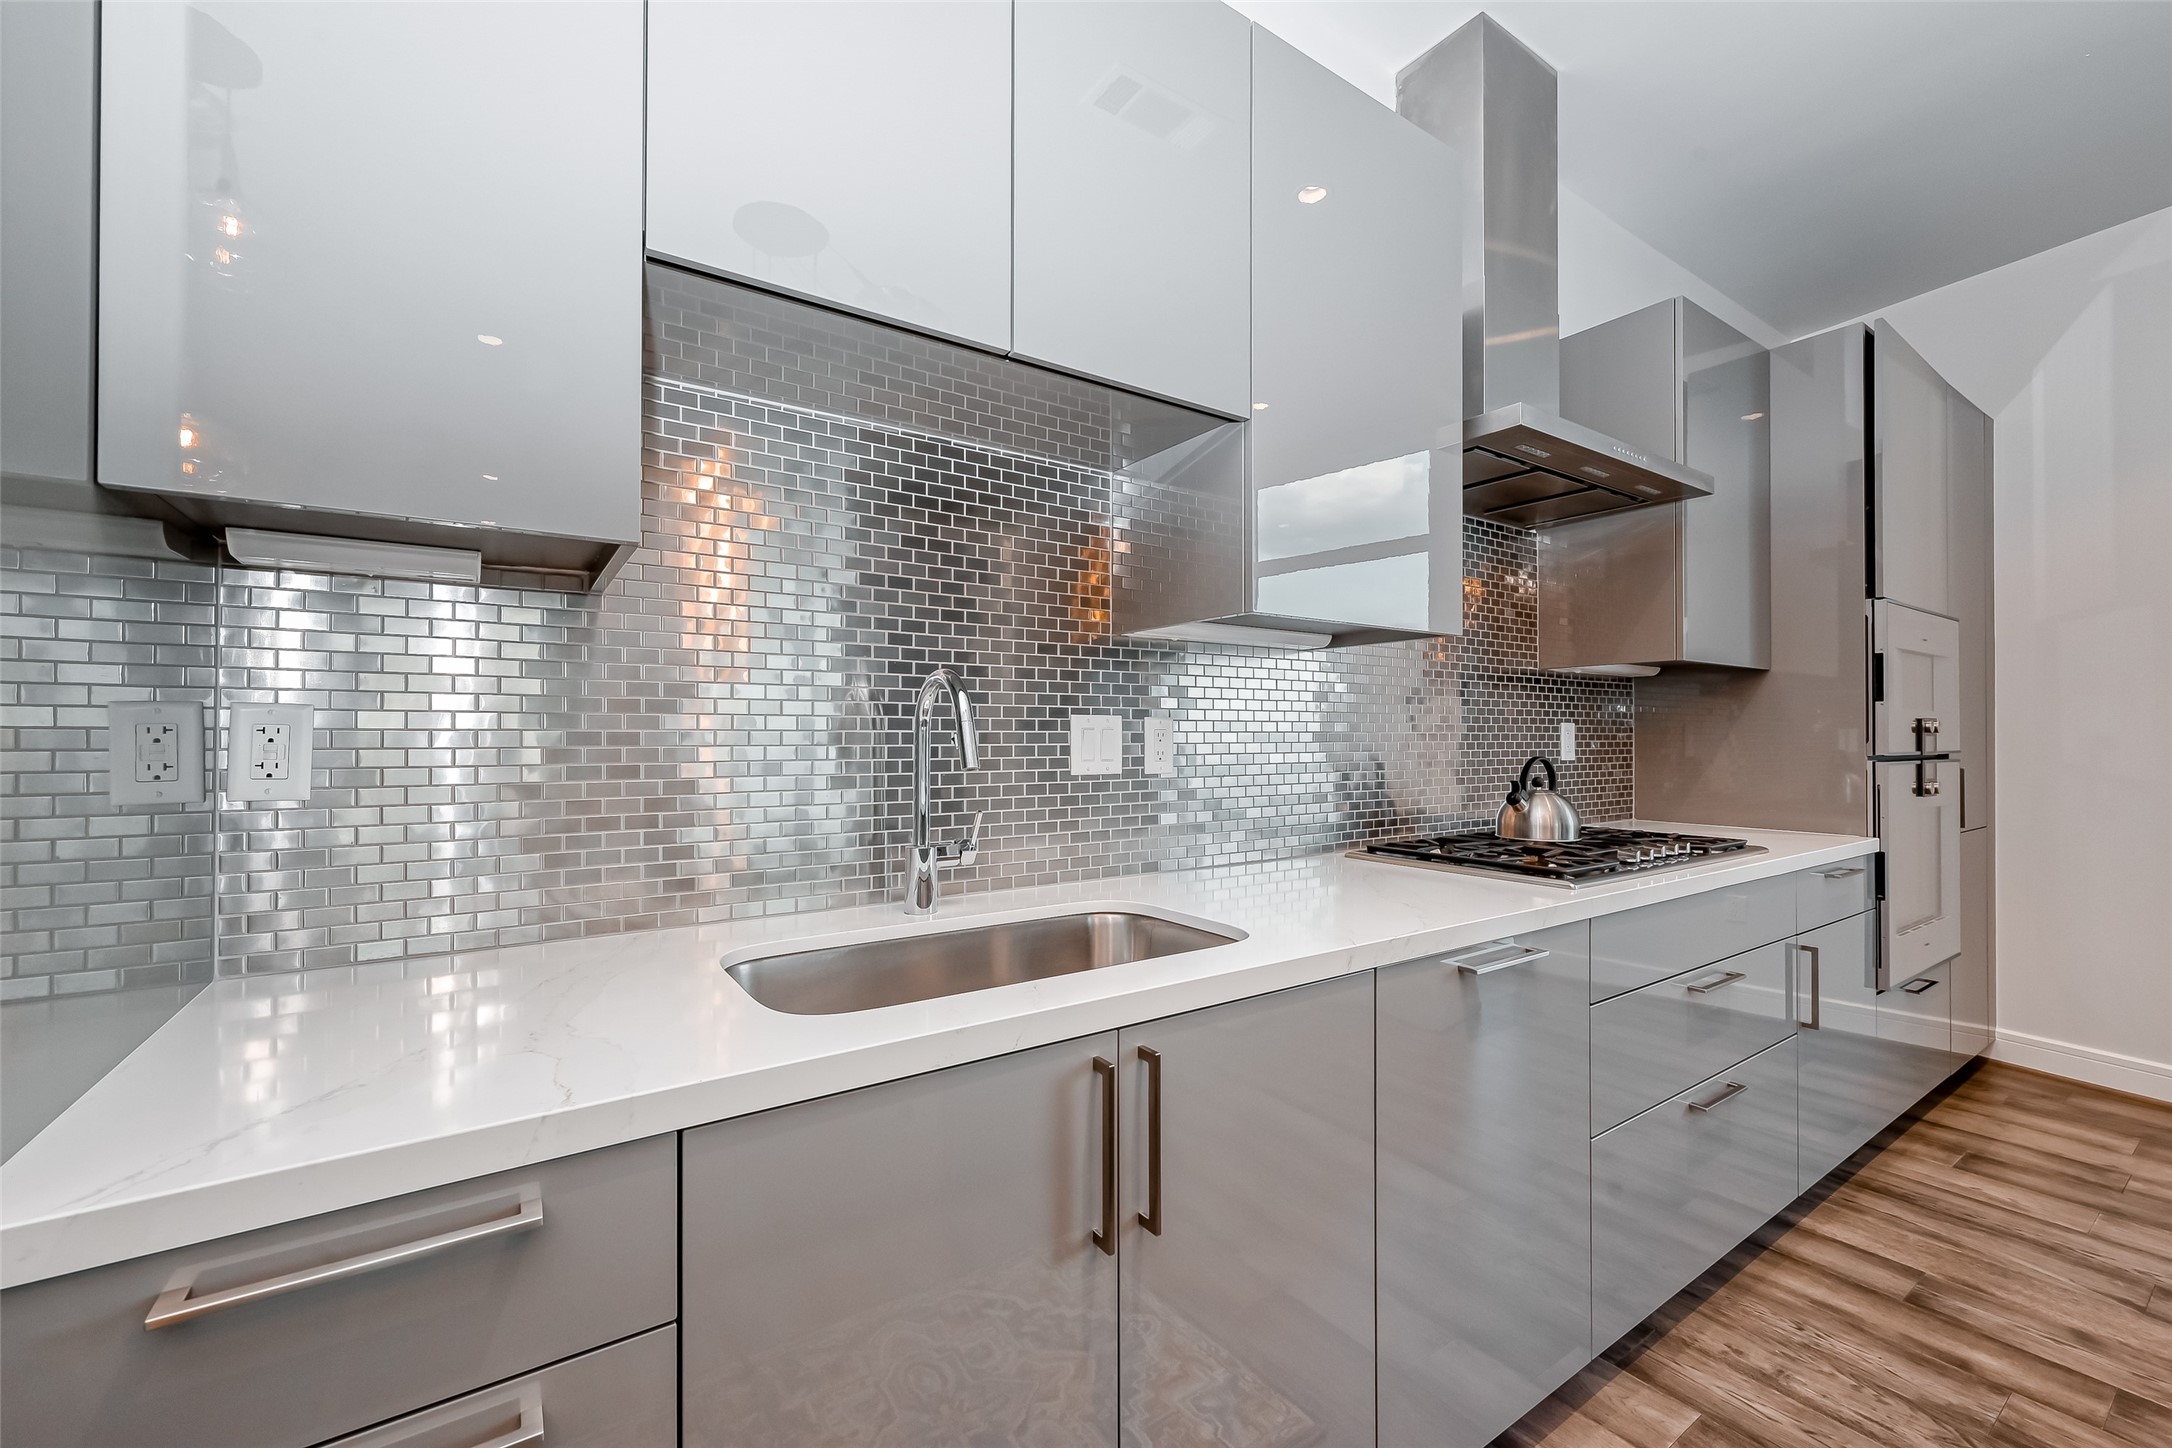 A more detailed view of the modern cabinetry and backsplash